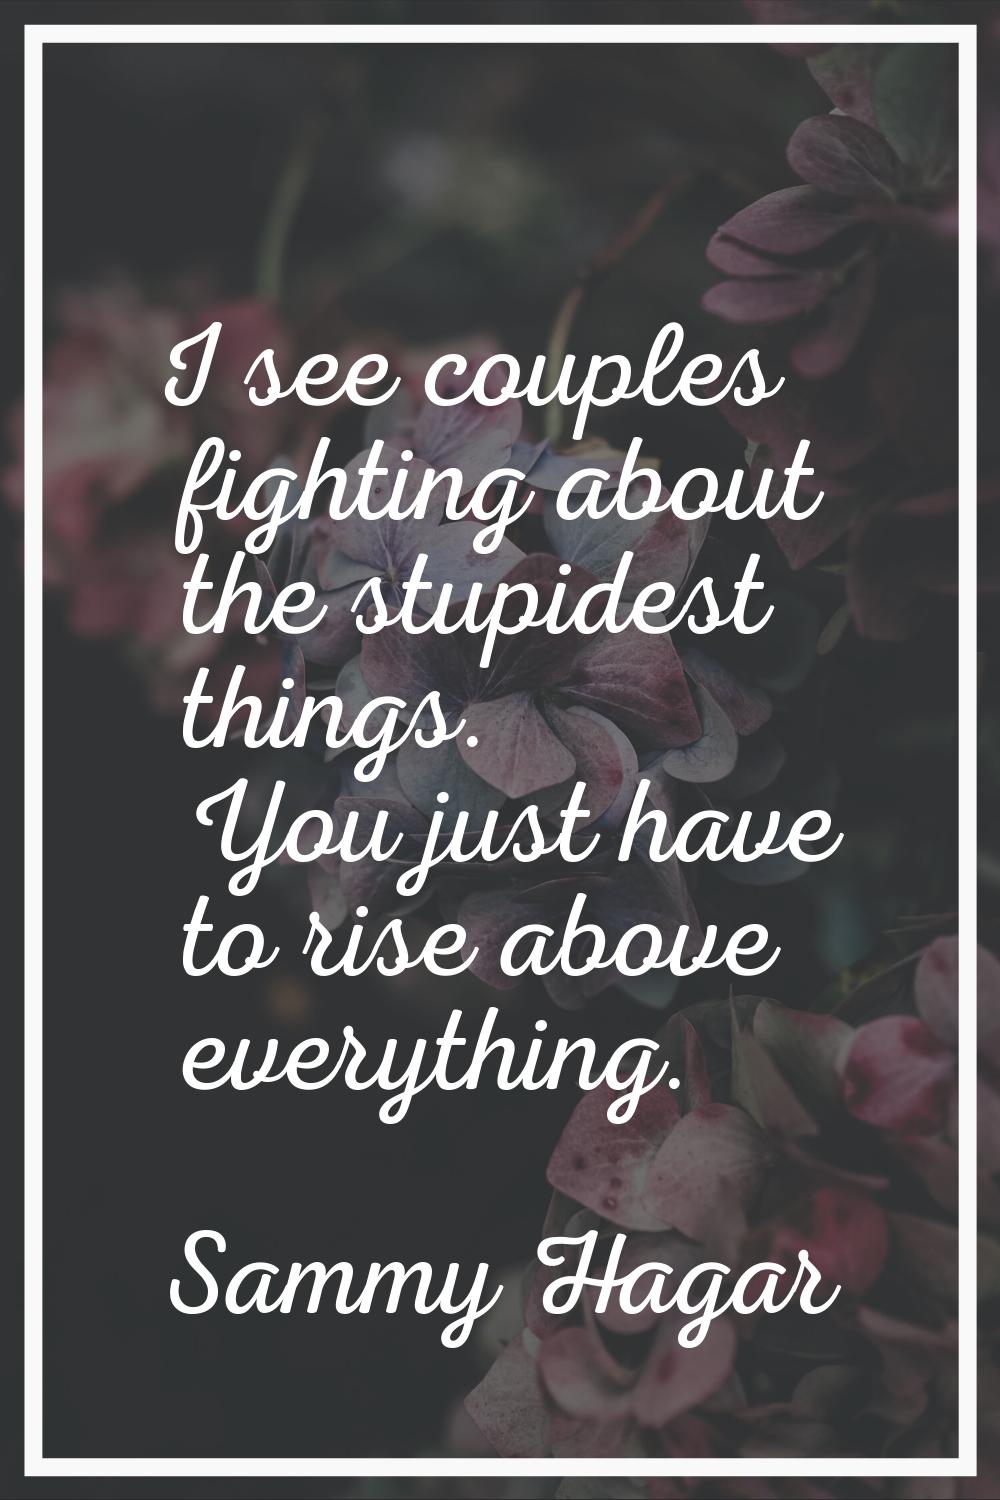 I see couples fighting about the stupidest things. You just have to rise above everything.